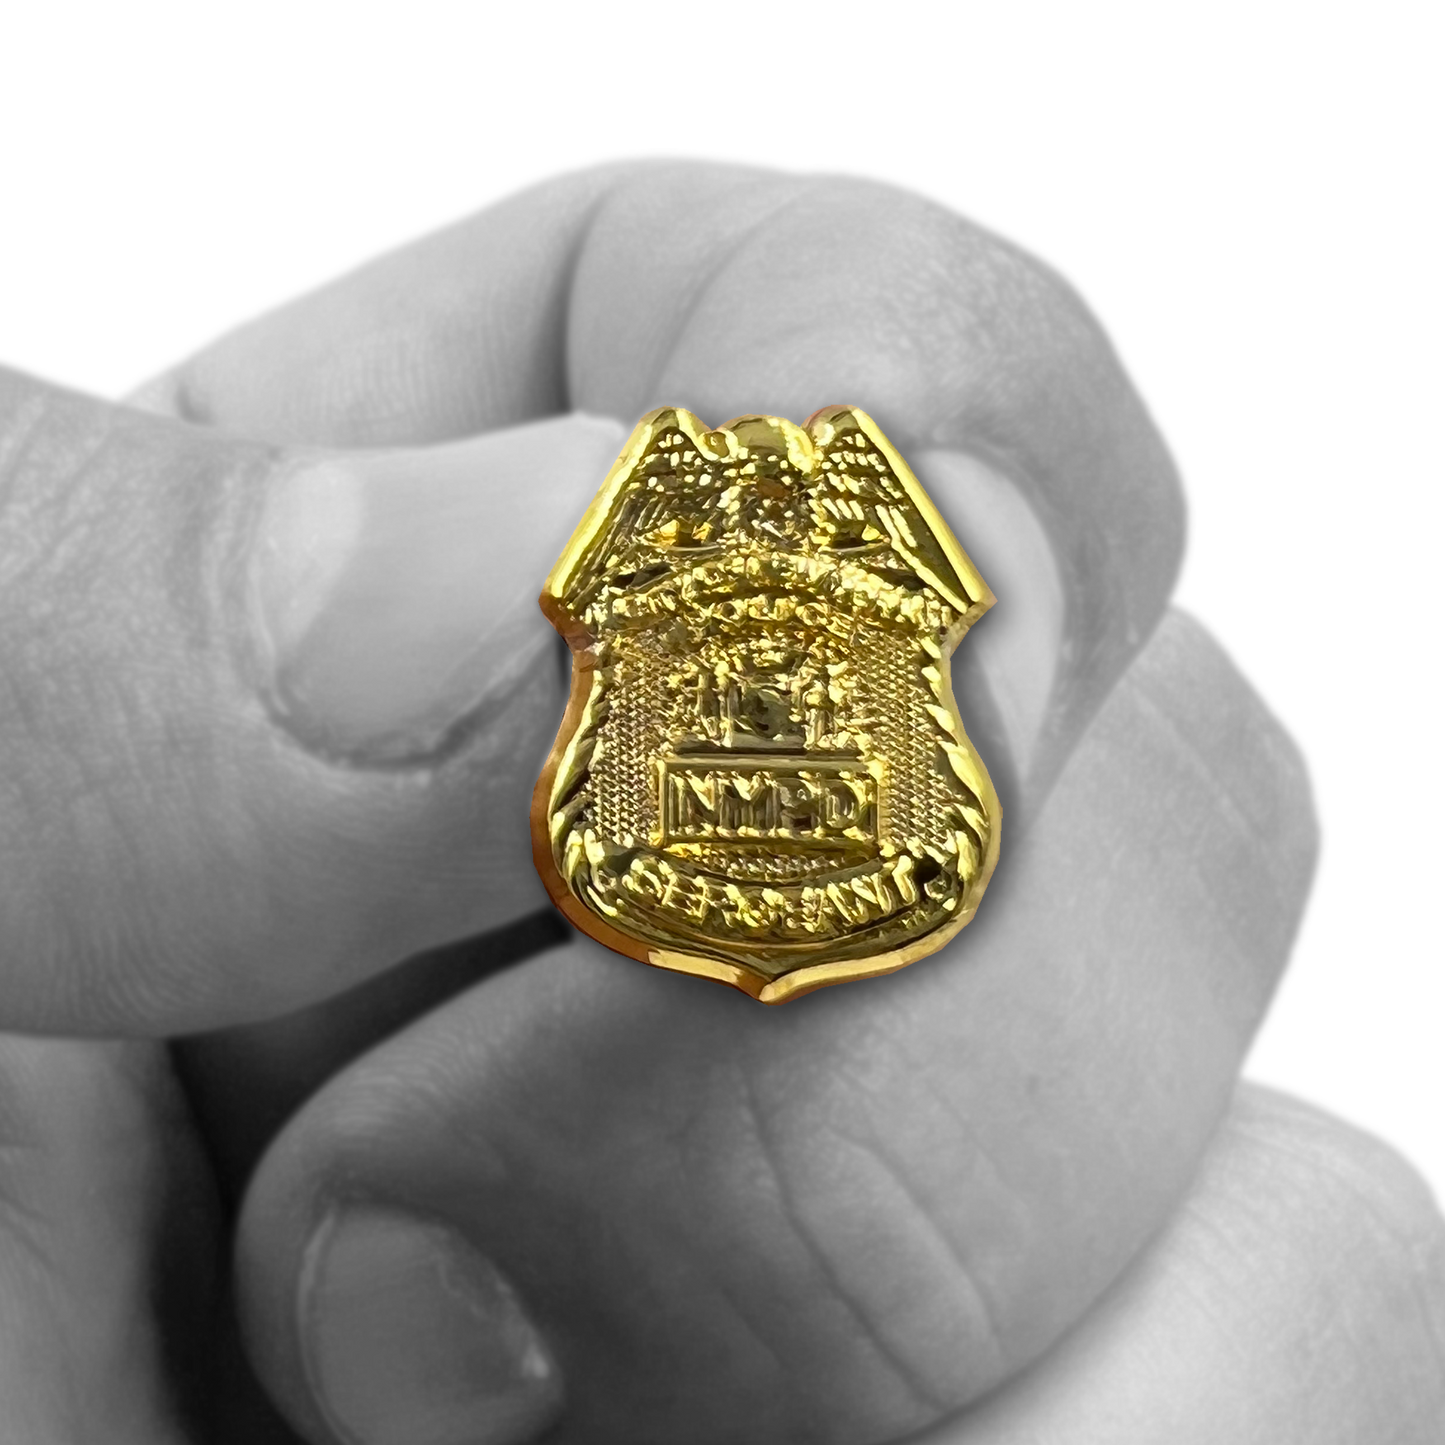 PBX-001-F New York Police Department Sergeant NYPD Sgt. Pin